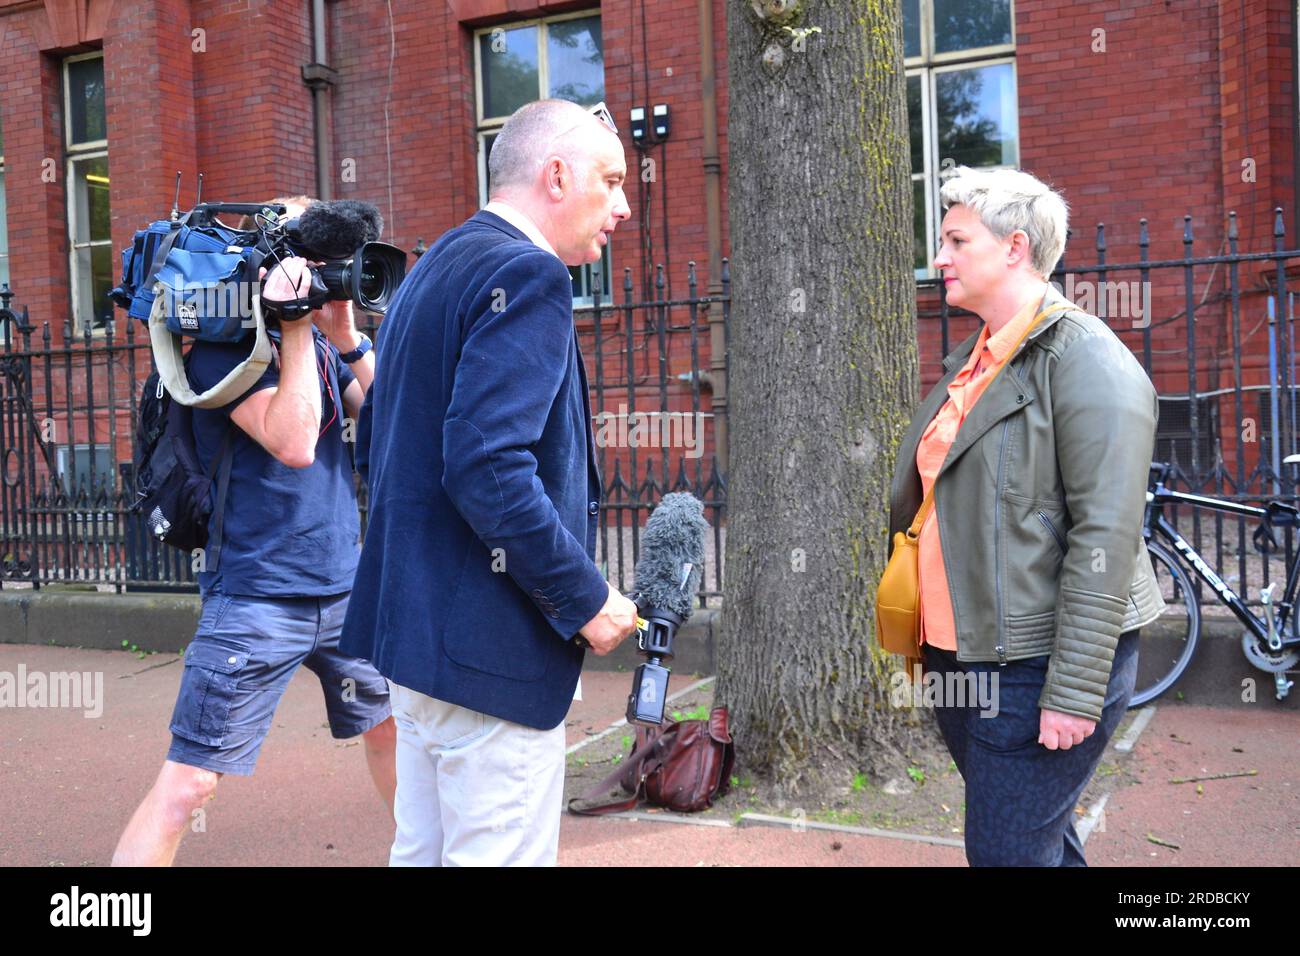 Manchester, UK. 20th July, 2023. A TV crew interviews one of the striking consultants. Senior NHS doctors picket a hospital on Oxford Road outside Manchester Royal Infirmary, Manchester, UK. Pictured at 10.28 am local time. Senior NHS doctors started a 48 hour strike from 20th July, 2023, to 22nd July to lobby for a pay rise. Thousands of senior NHS doctors are striking across the country today, the first of this type in over ten years. This includes consultant doctors and dentists in hospitals. Critics say this will cause great disruption to patients. Credit: Terry Waller/Alamy Live News Stock Photo